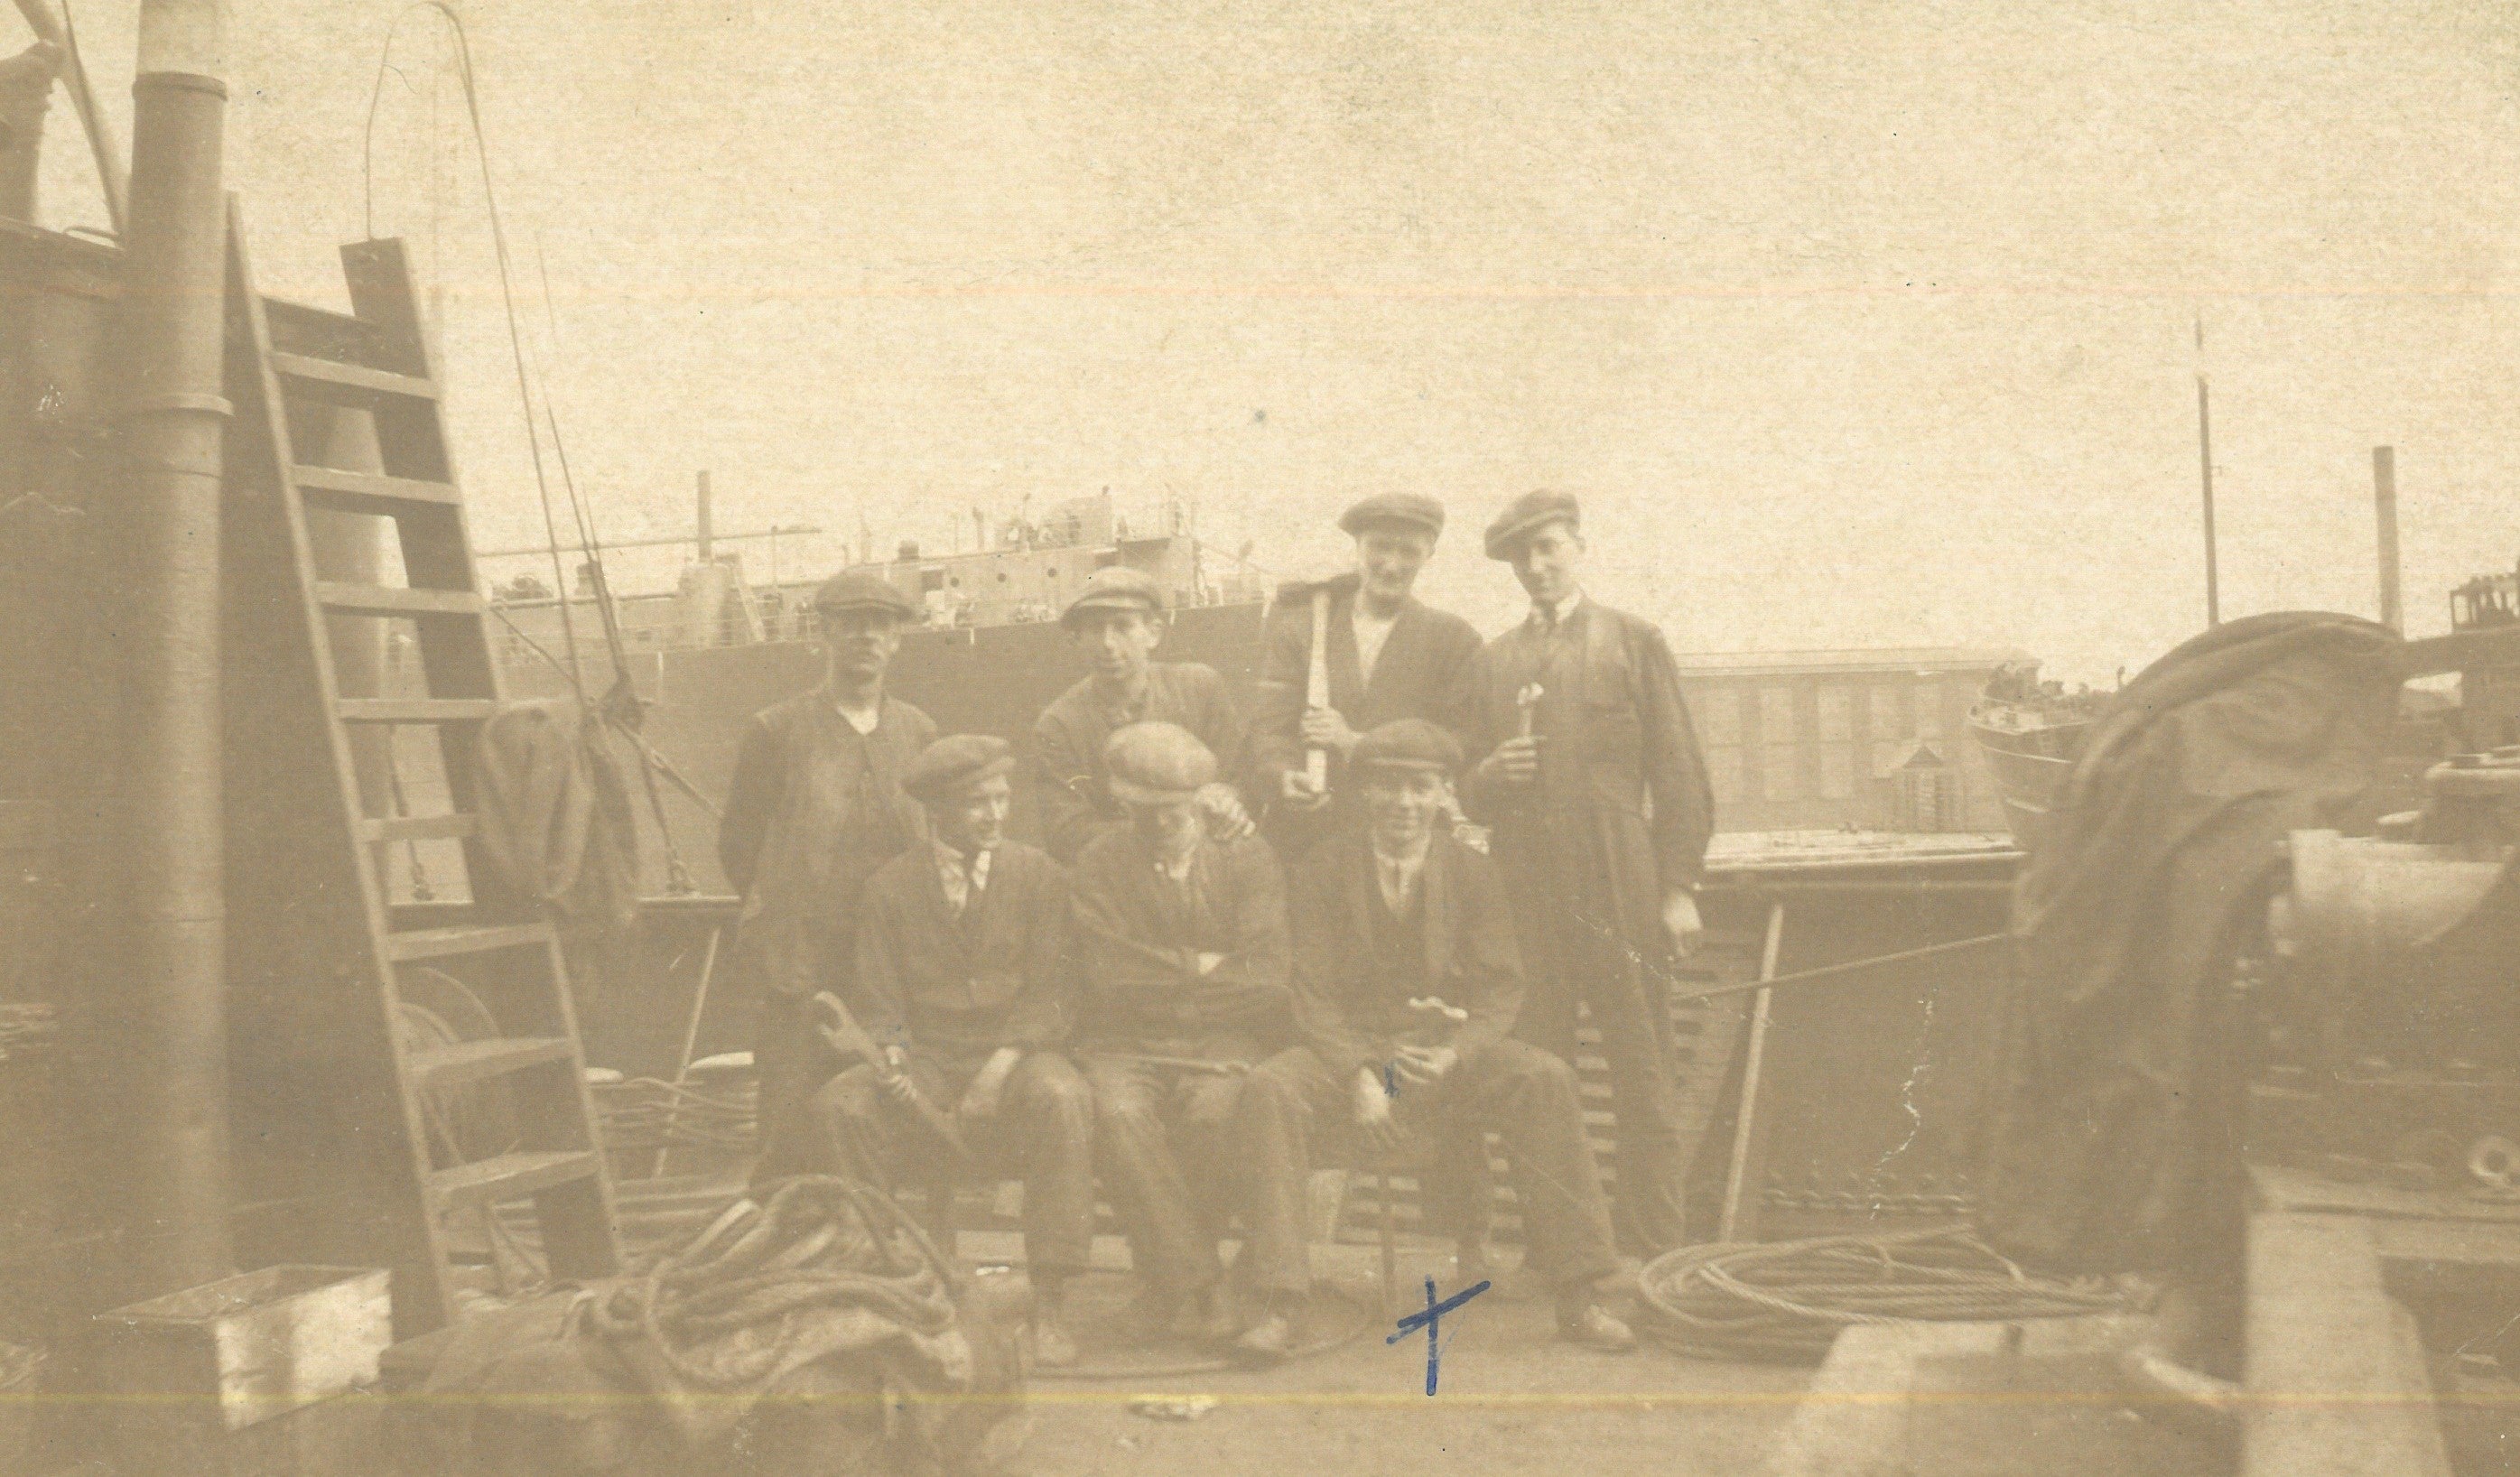 Employees pose and smile for a group photograph on the deck of one of the ships being repaired in the docks.